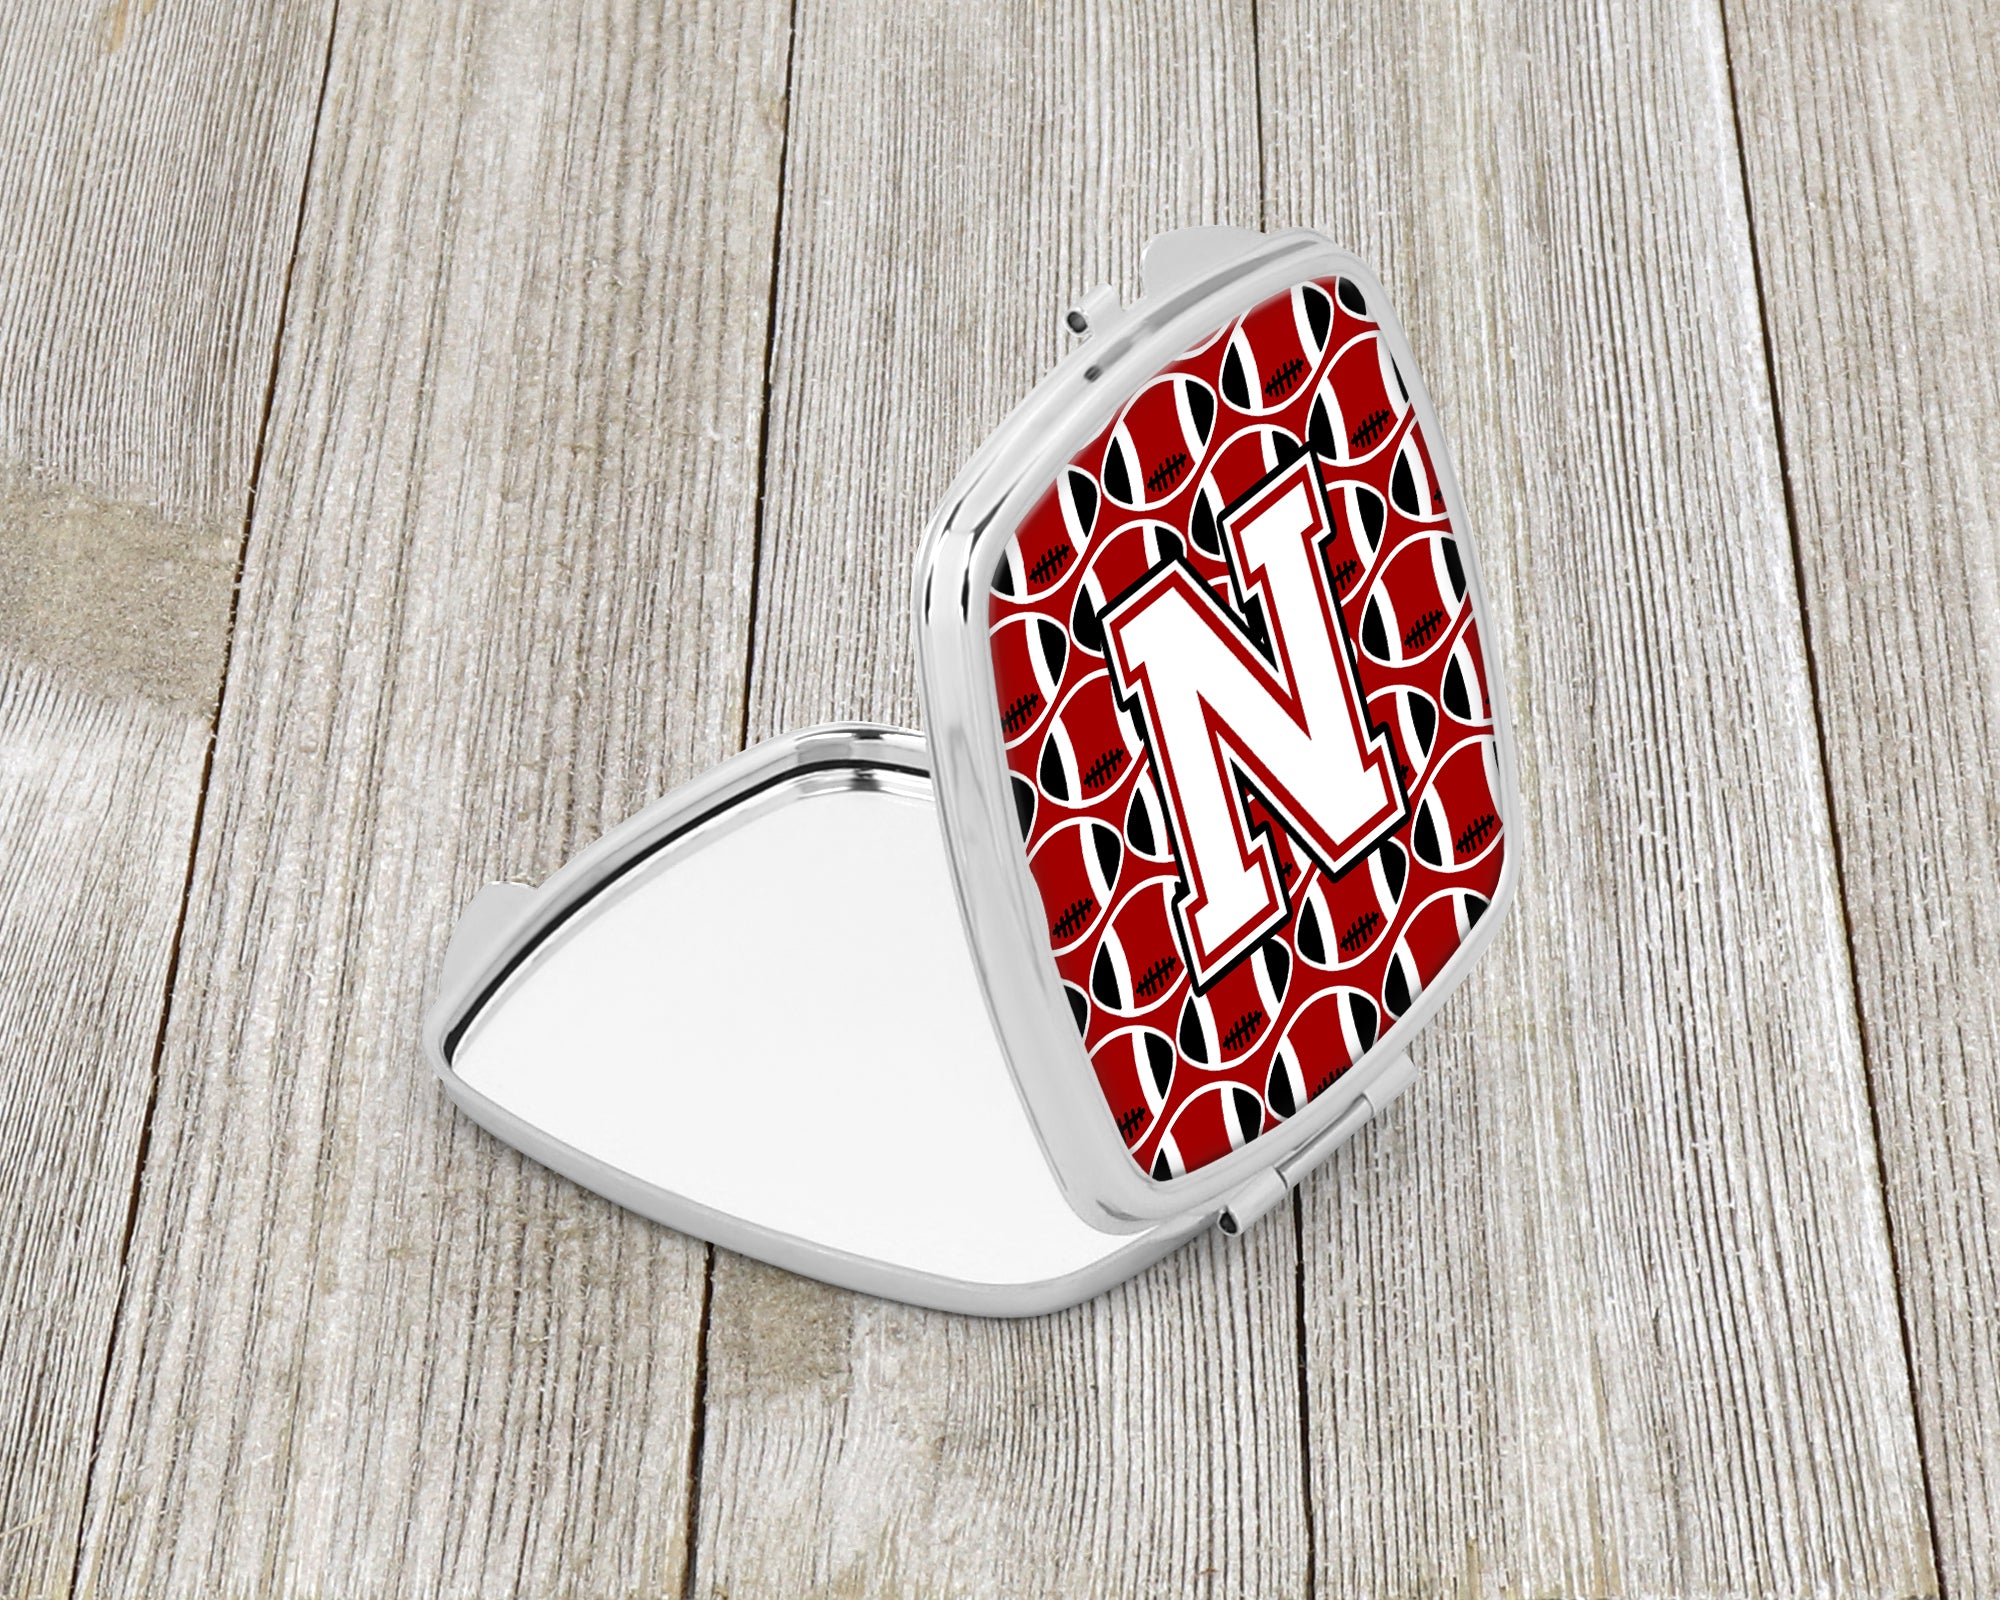 Letter N Football Cardinal and White Compact Mirror CJ1082-NSCM  the-store.com.